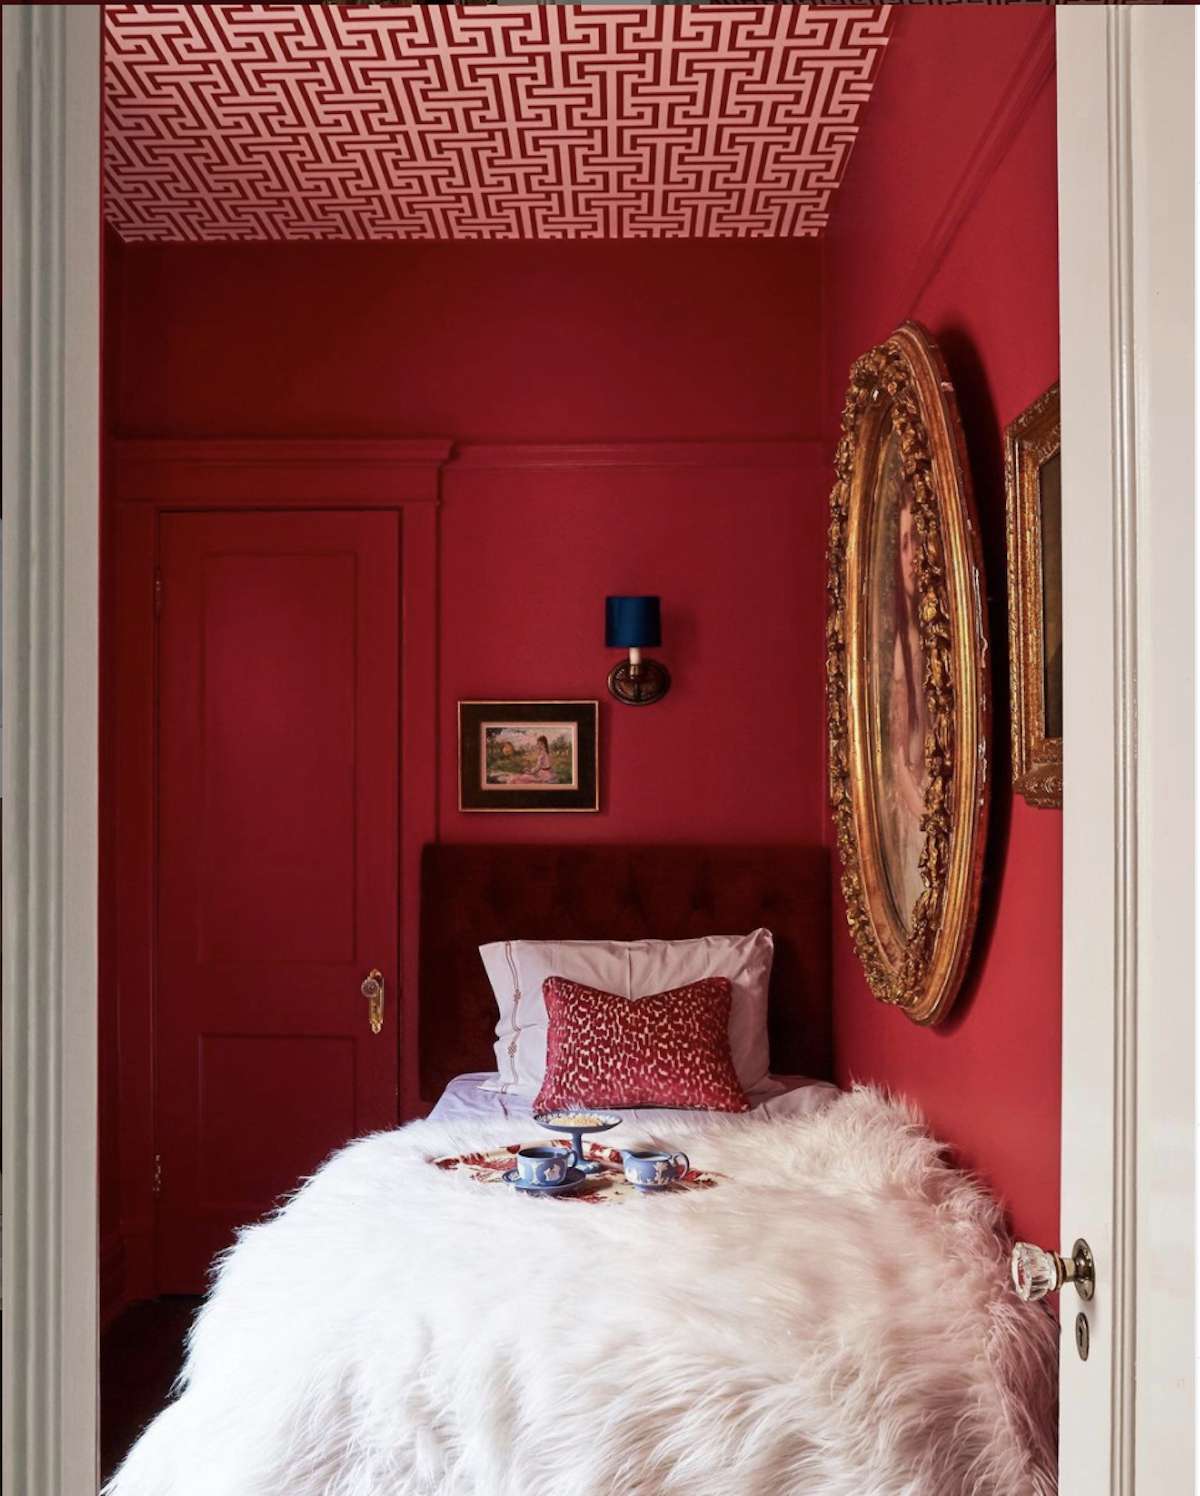 bedroom with red walls, red and white pattern ceiling, white fluffy blanket